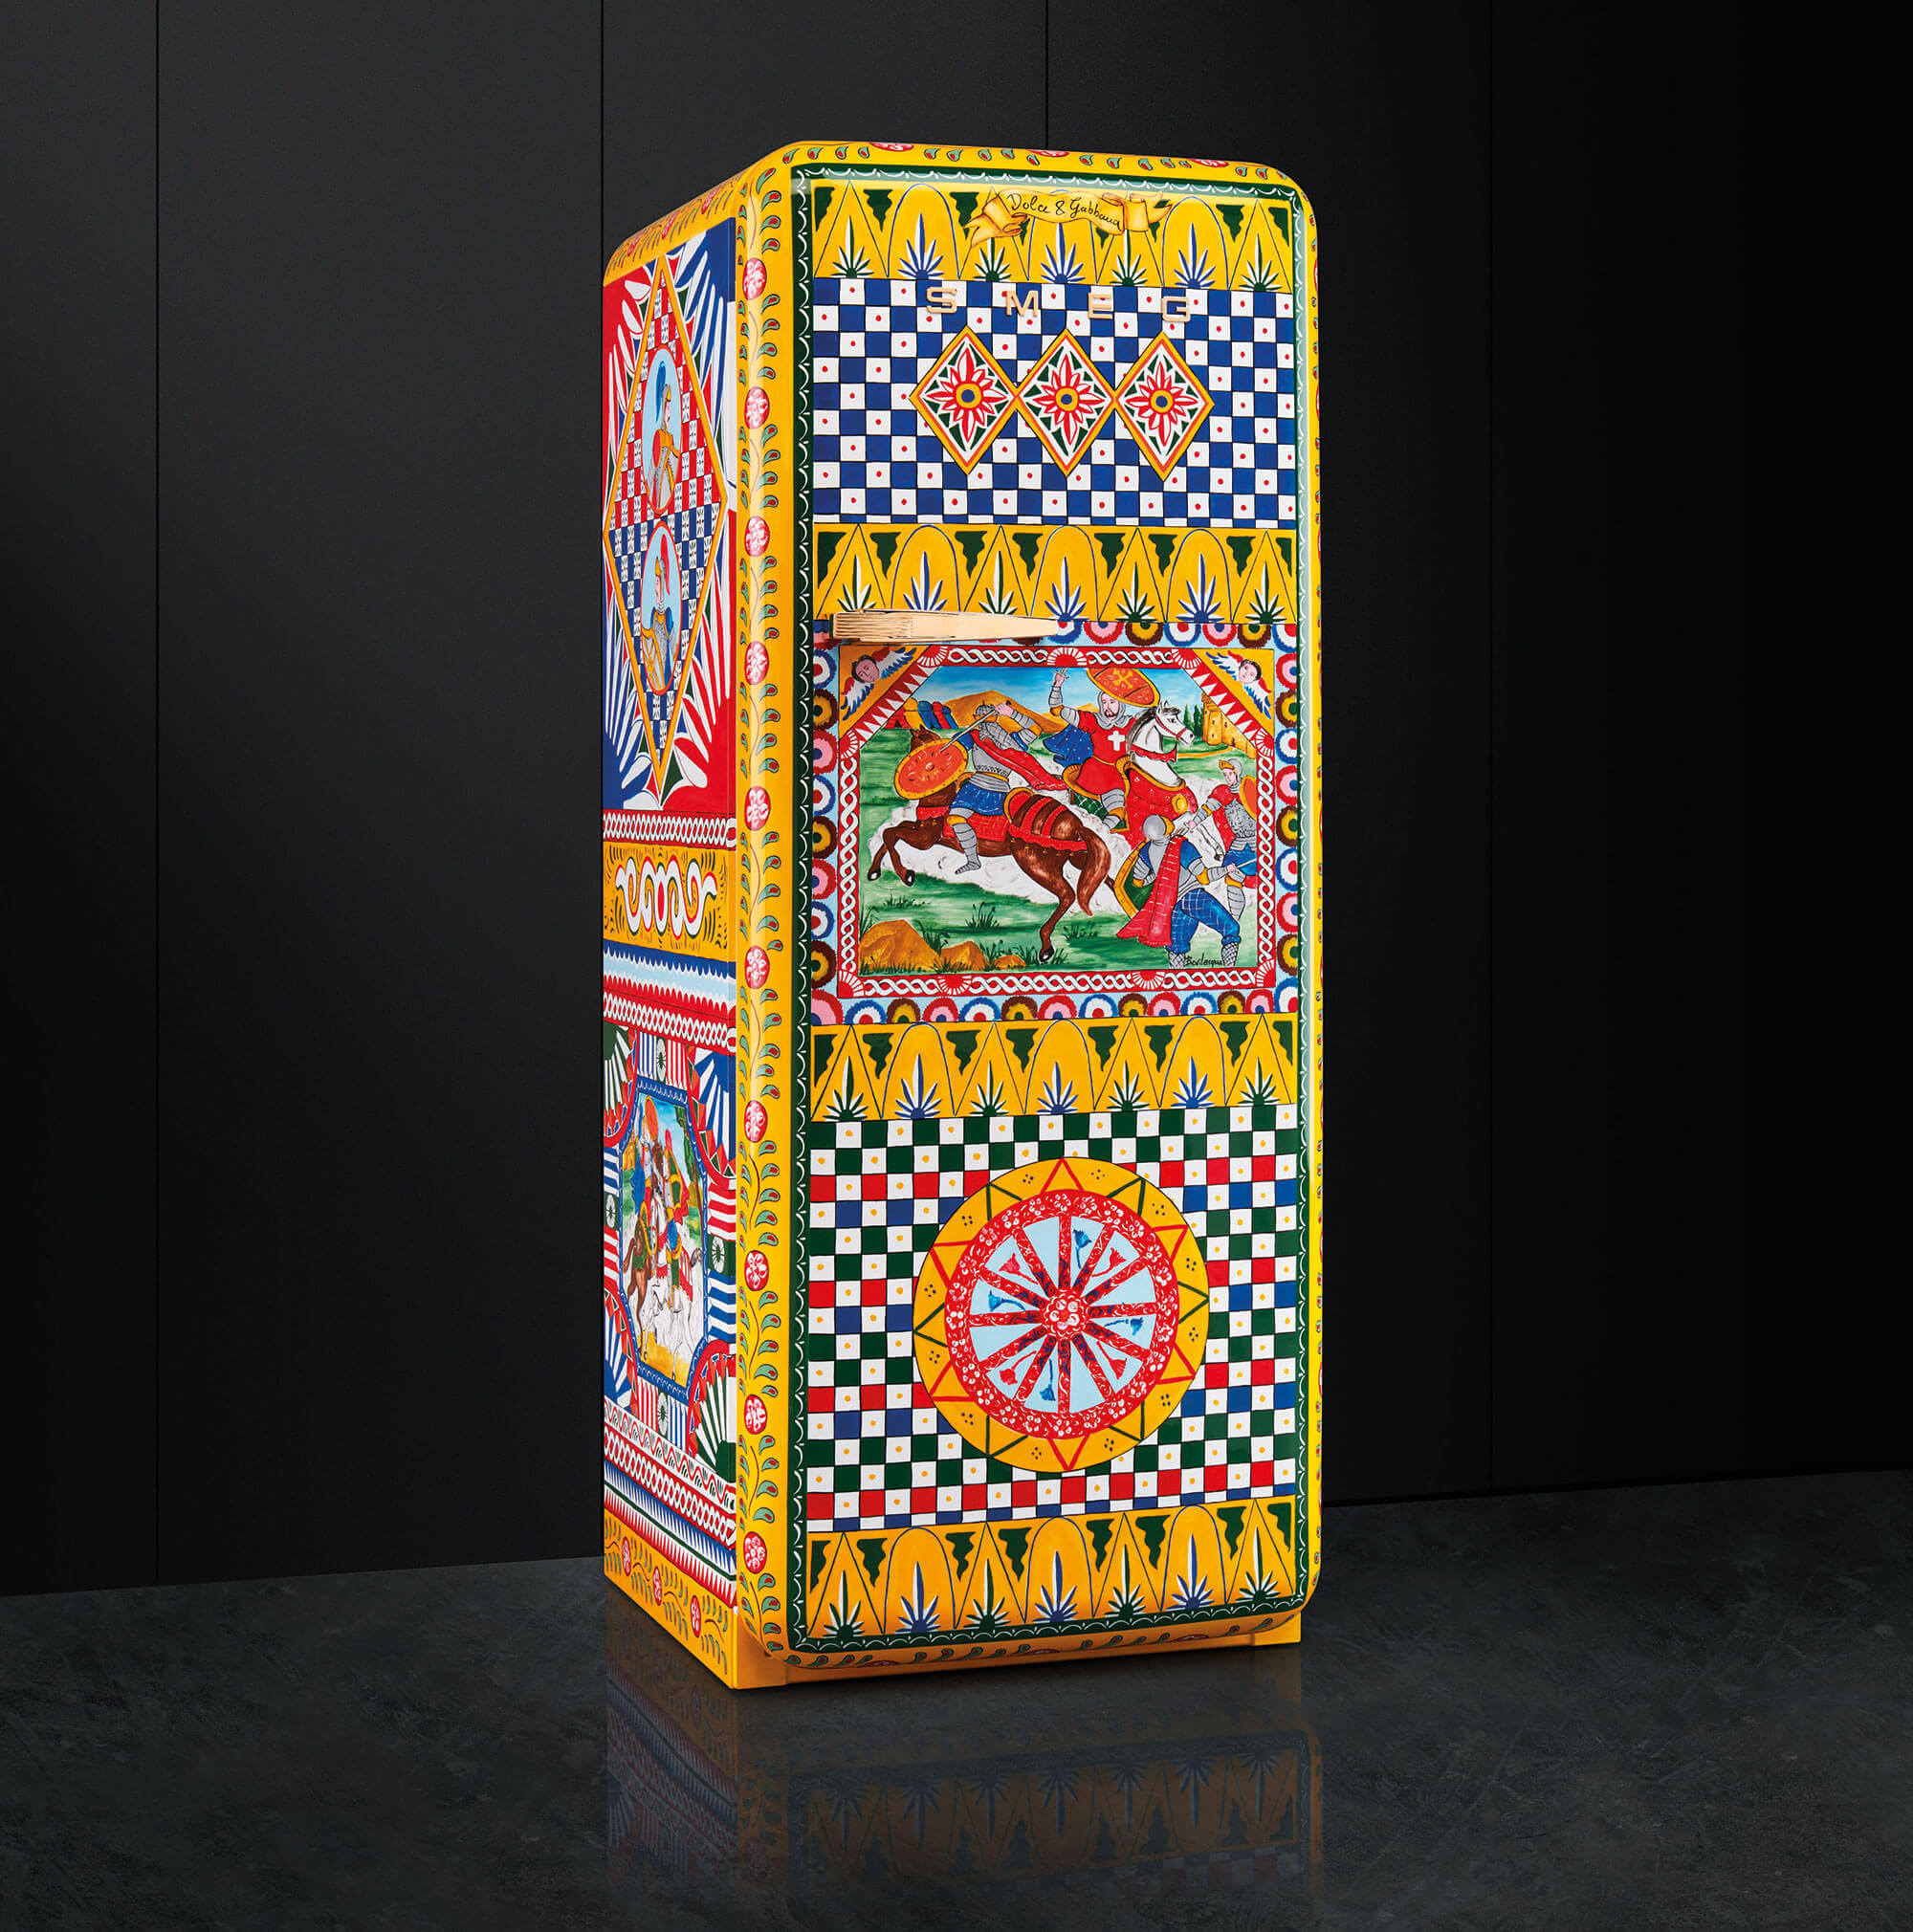 Smeg partnering with Dolce & Gabbana to create hand-painted refrigerators that embody the duo's "la dolce vita" aesthetic.